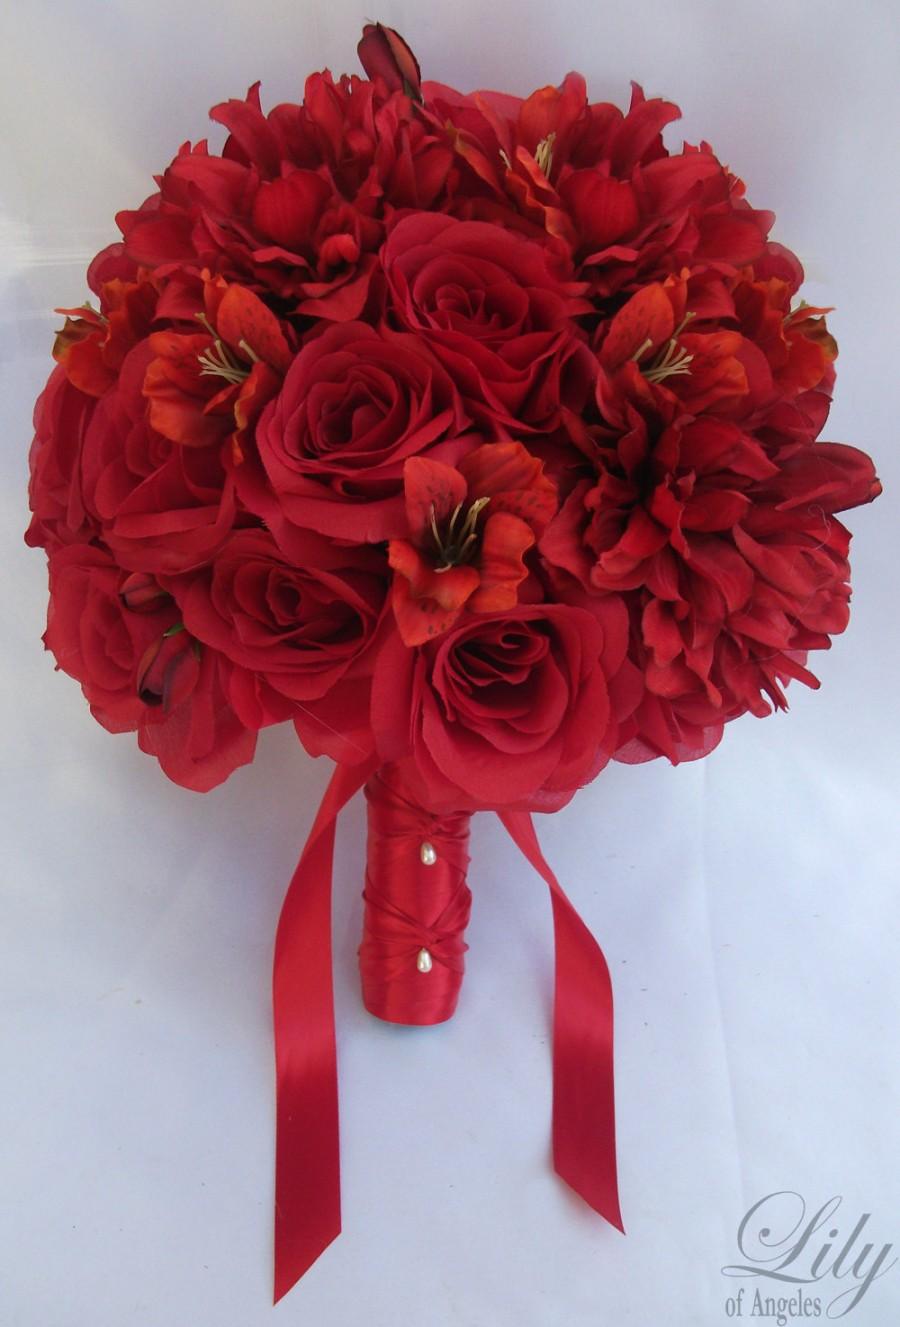 Свадьба - 17 Piece Package Wedding Bridal Bride Maid Of Honor Bridesmaid Bouquet Boutonniere Corsage Silk Flower APPLE RED "Lily of Angeles" RERE03